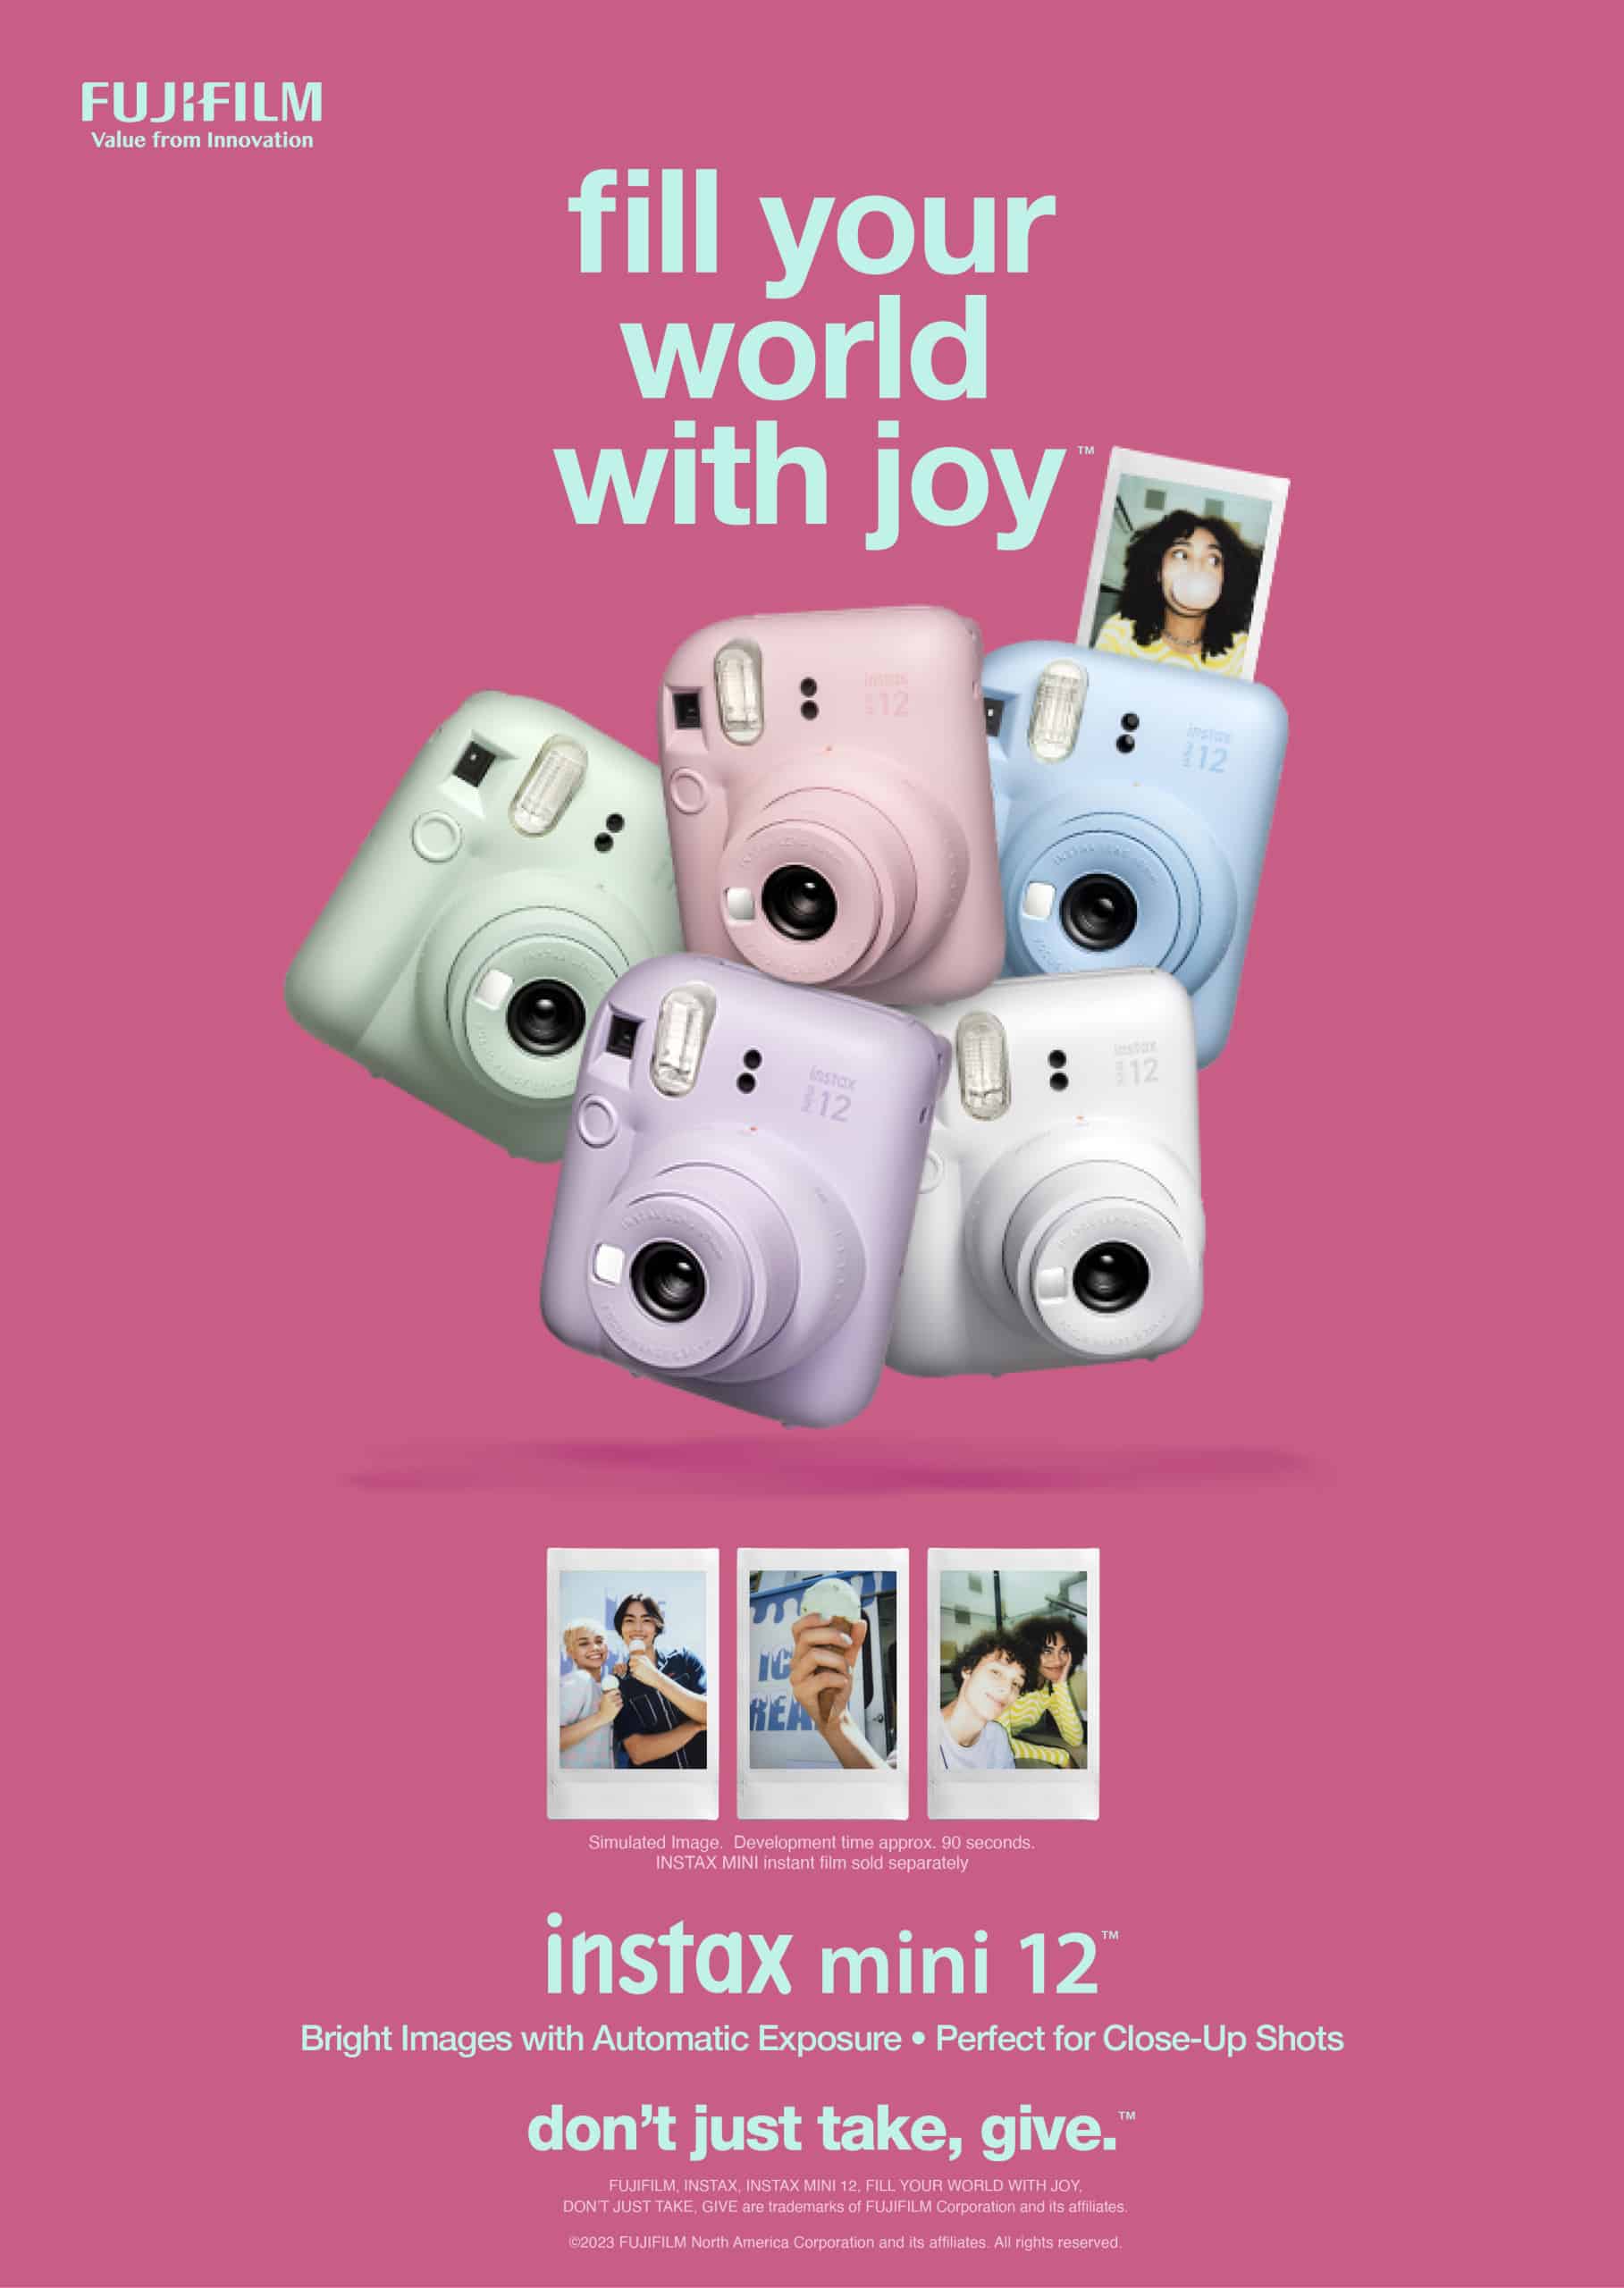 fill your world with joy - instax mini 12